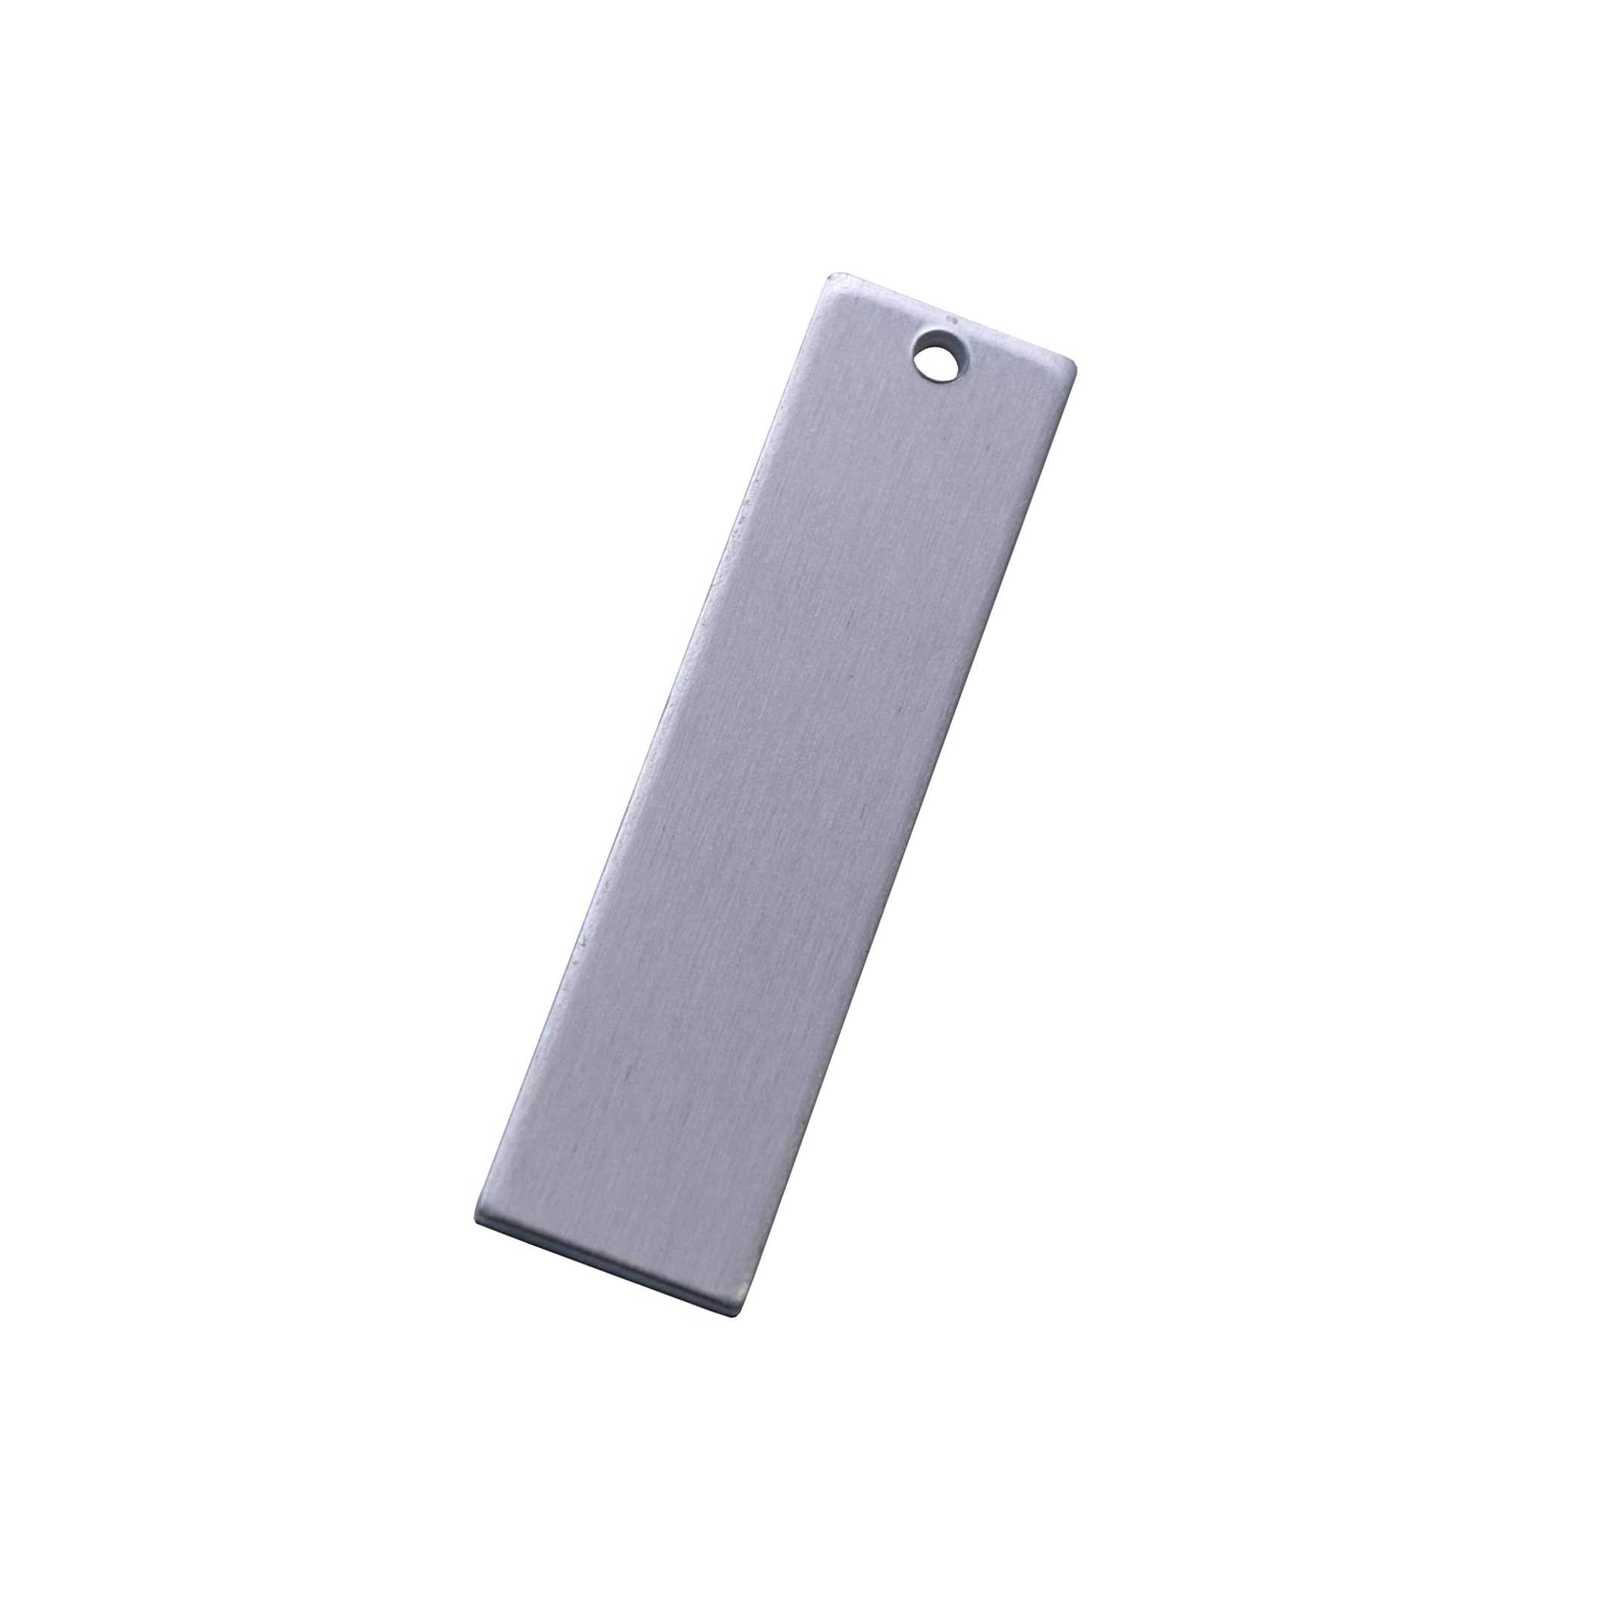 Ing Blanks, 1/2 Inch X 2 Inch Rectangle With One Hole, Aluminum 0.063 Inch 14